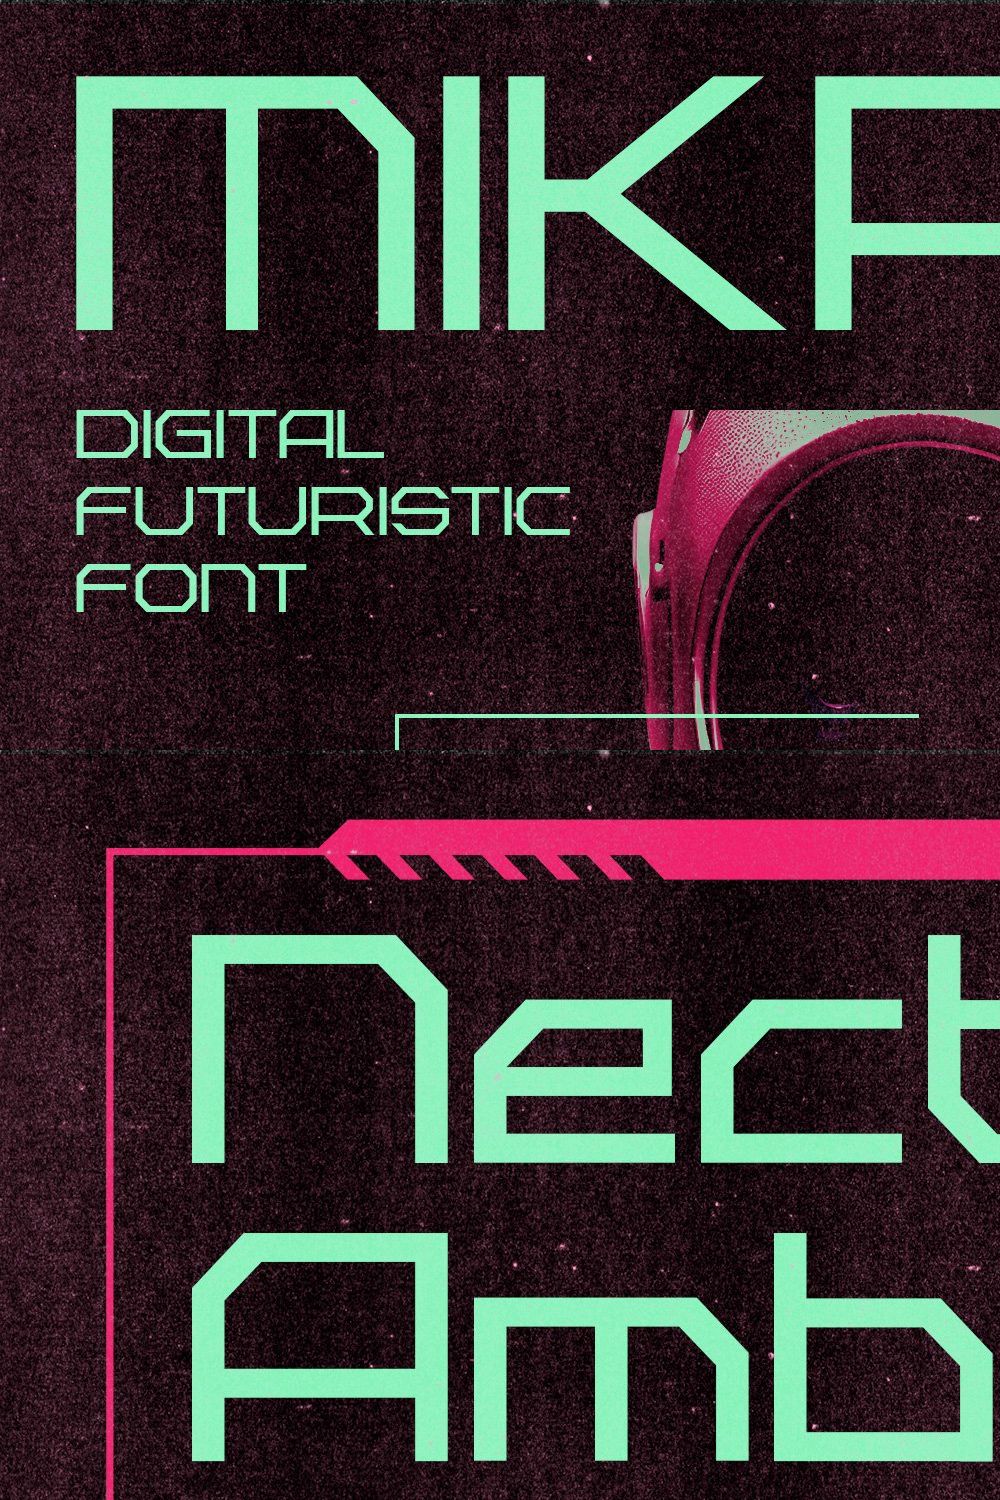 Mikratos - Futuristic Display Fonts pinterest preview image.